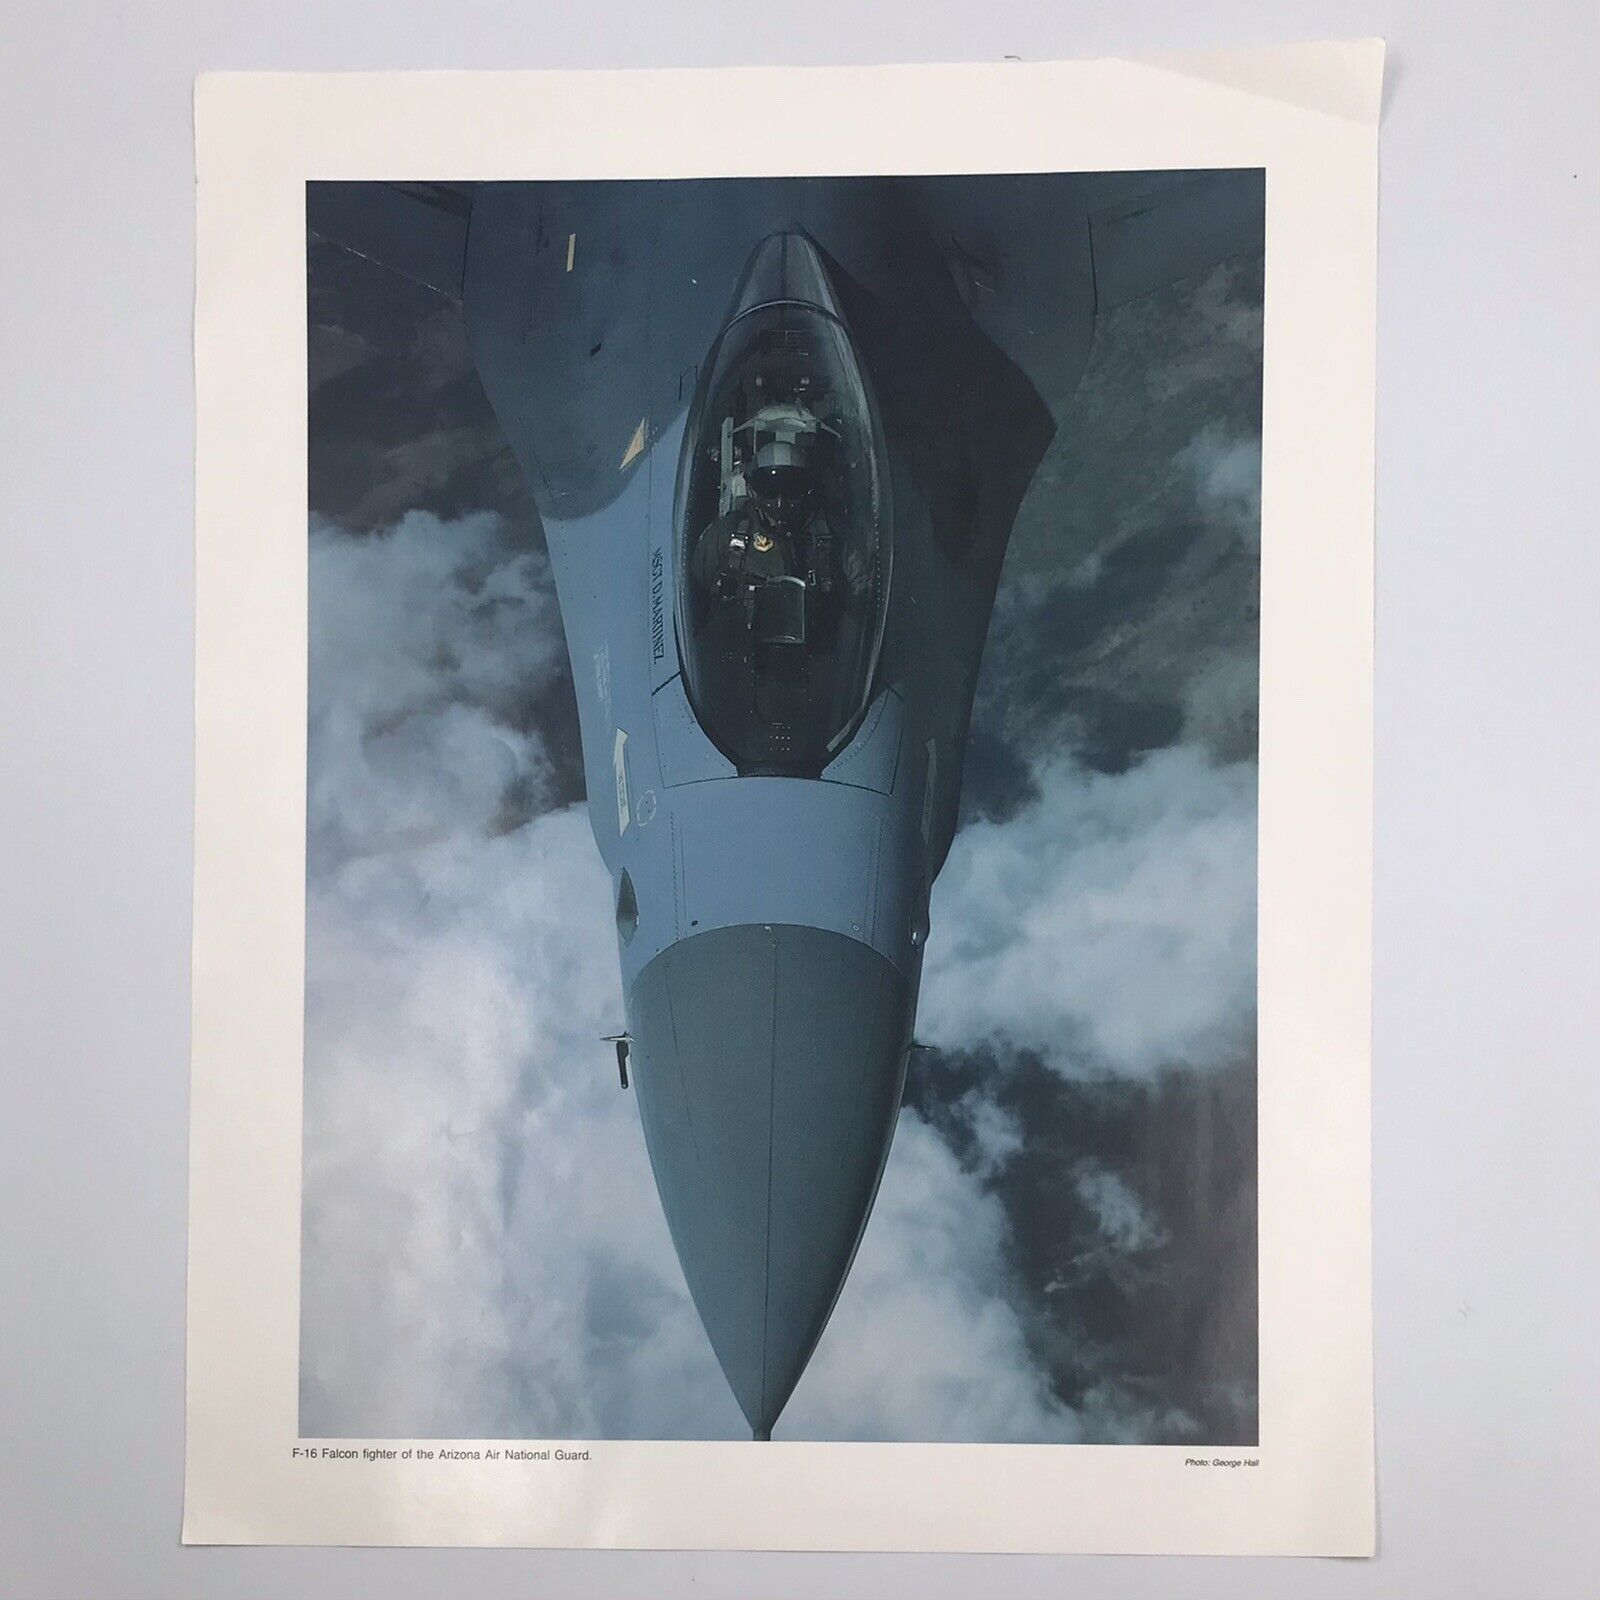 VTG F-16 Falcon Air National Guard Print 16 in x 20 in Photo by George Hall 80's